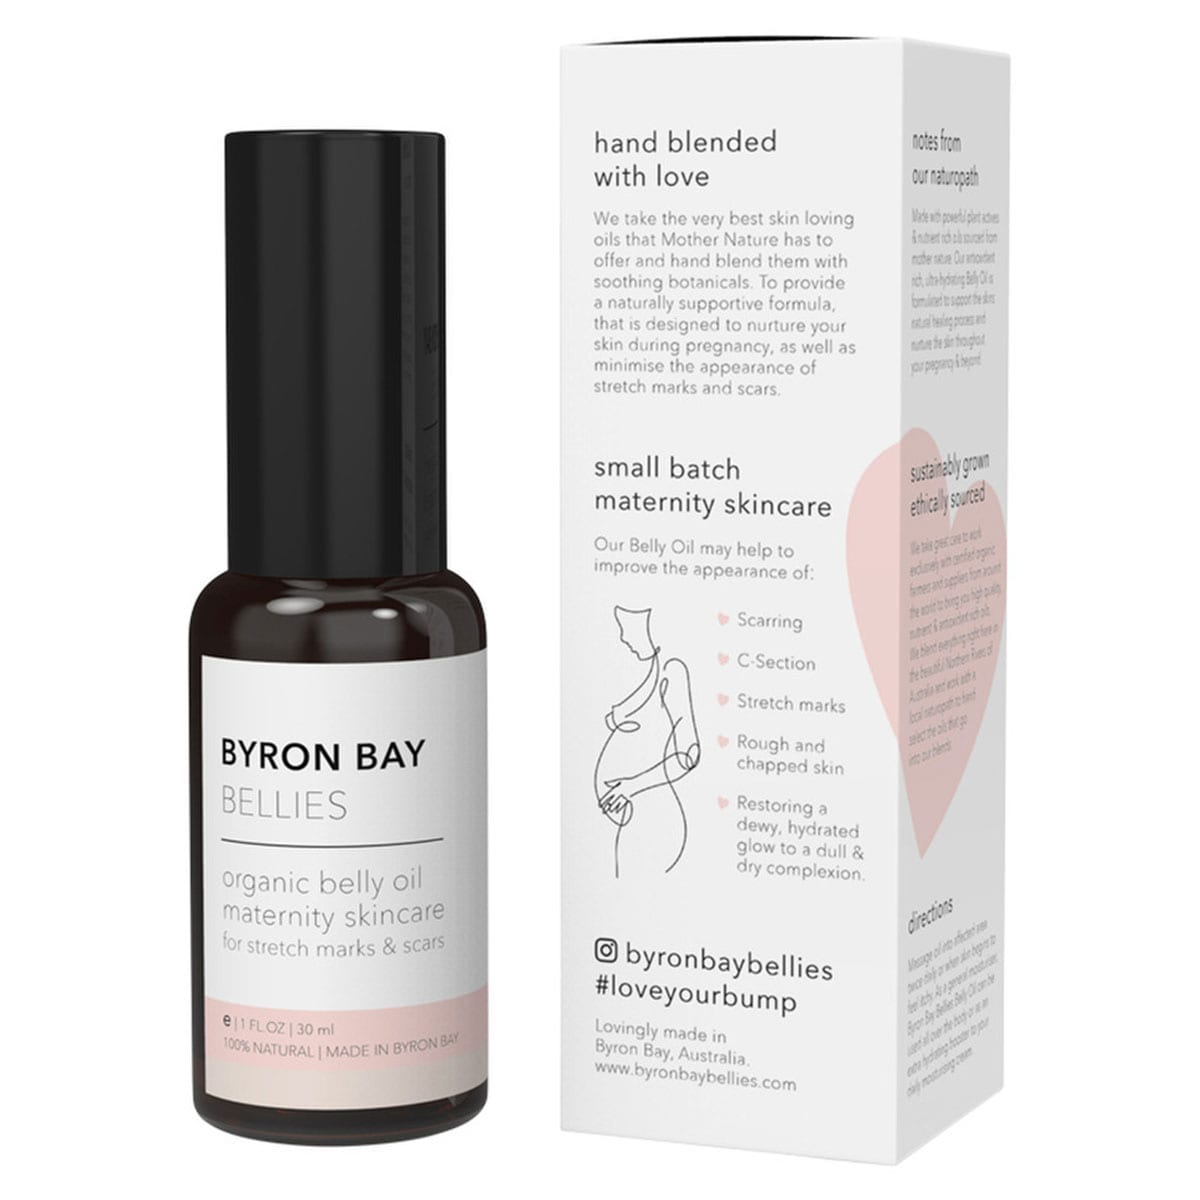 Byron Bay Bellies Organic Belly Oil for Stretch Marks & Scars 30ml